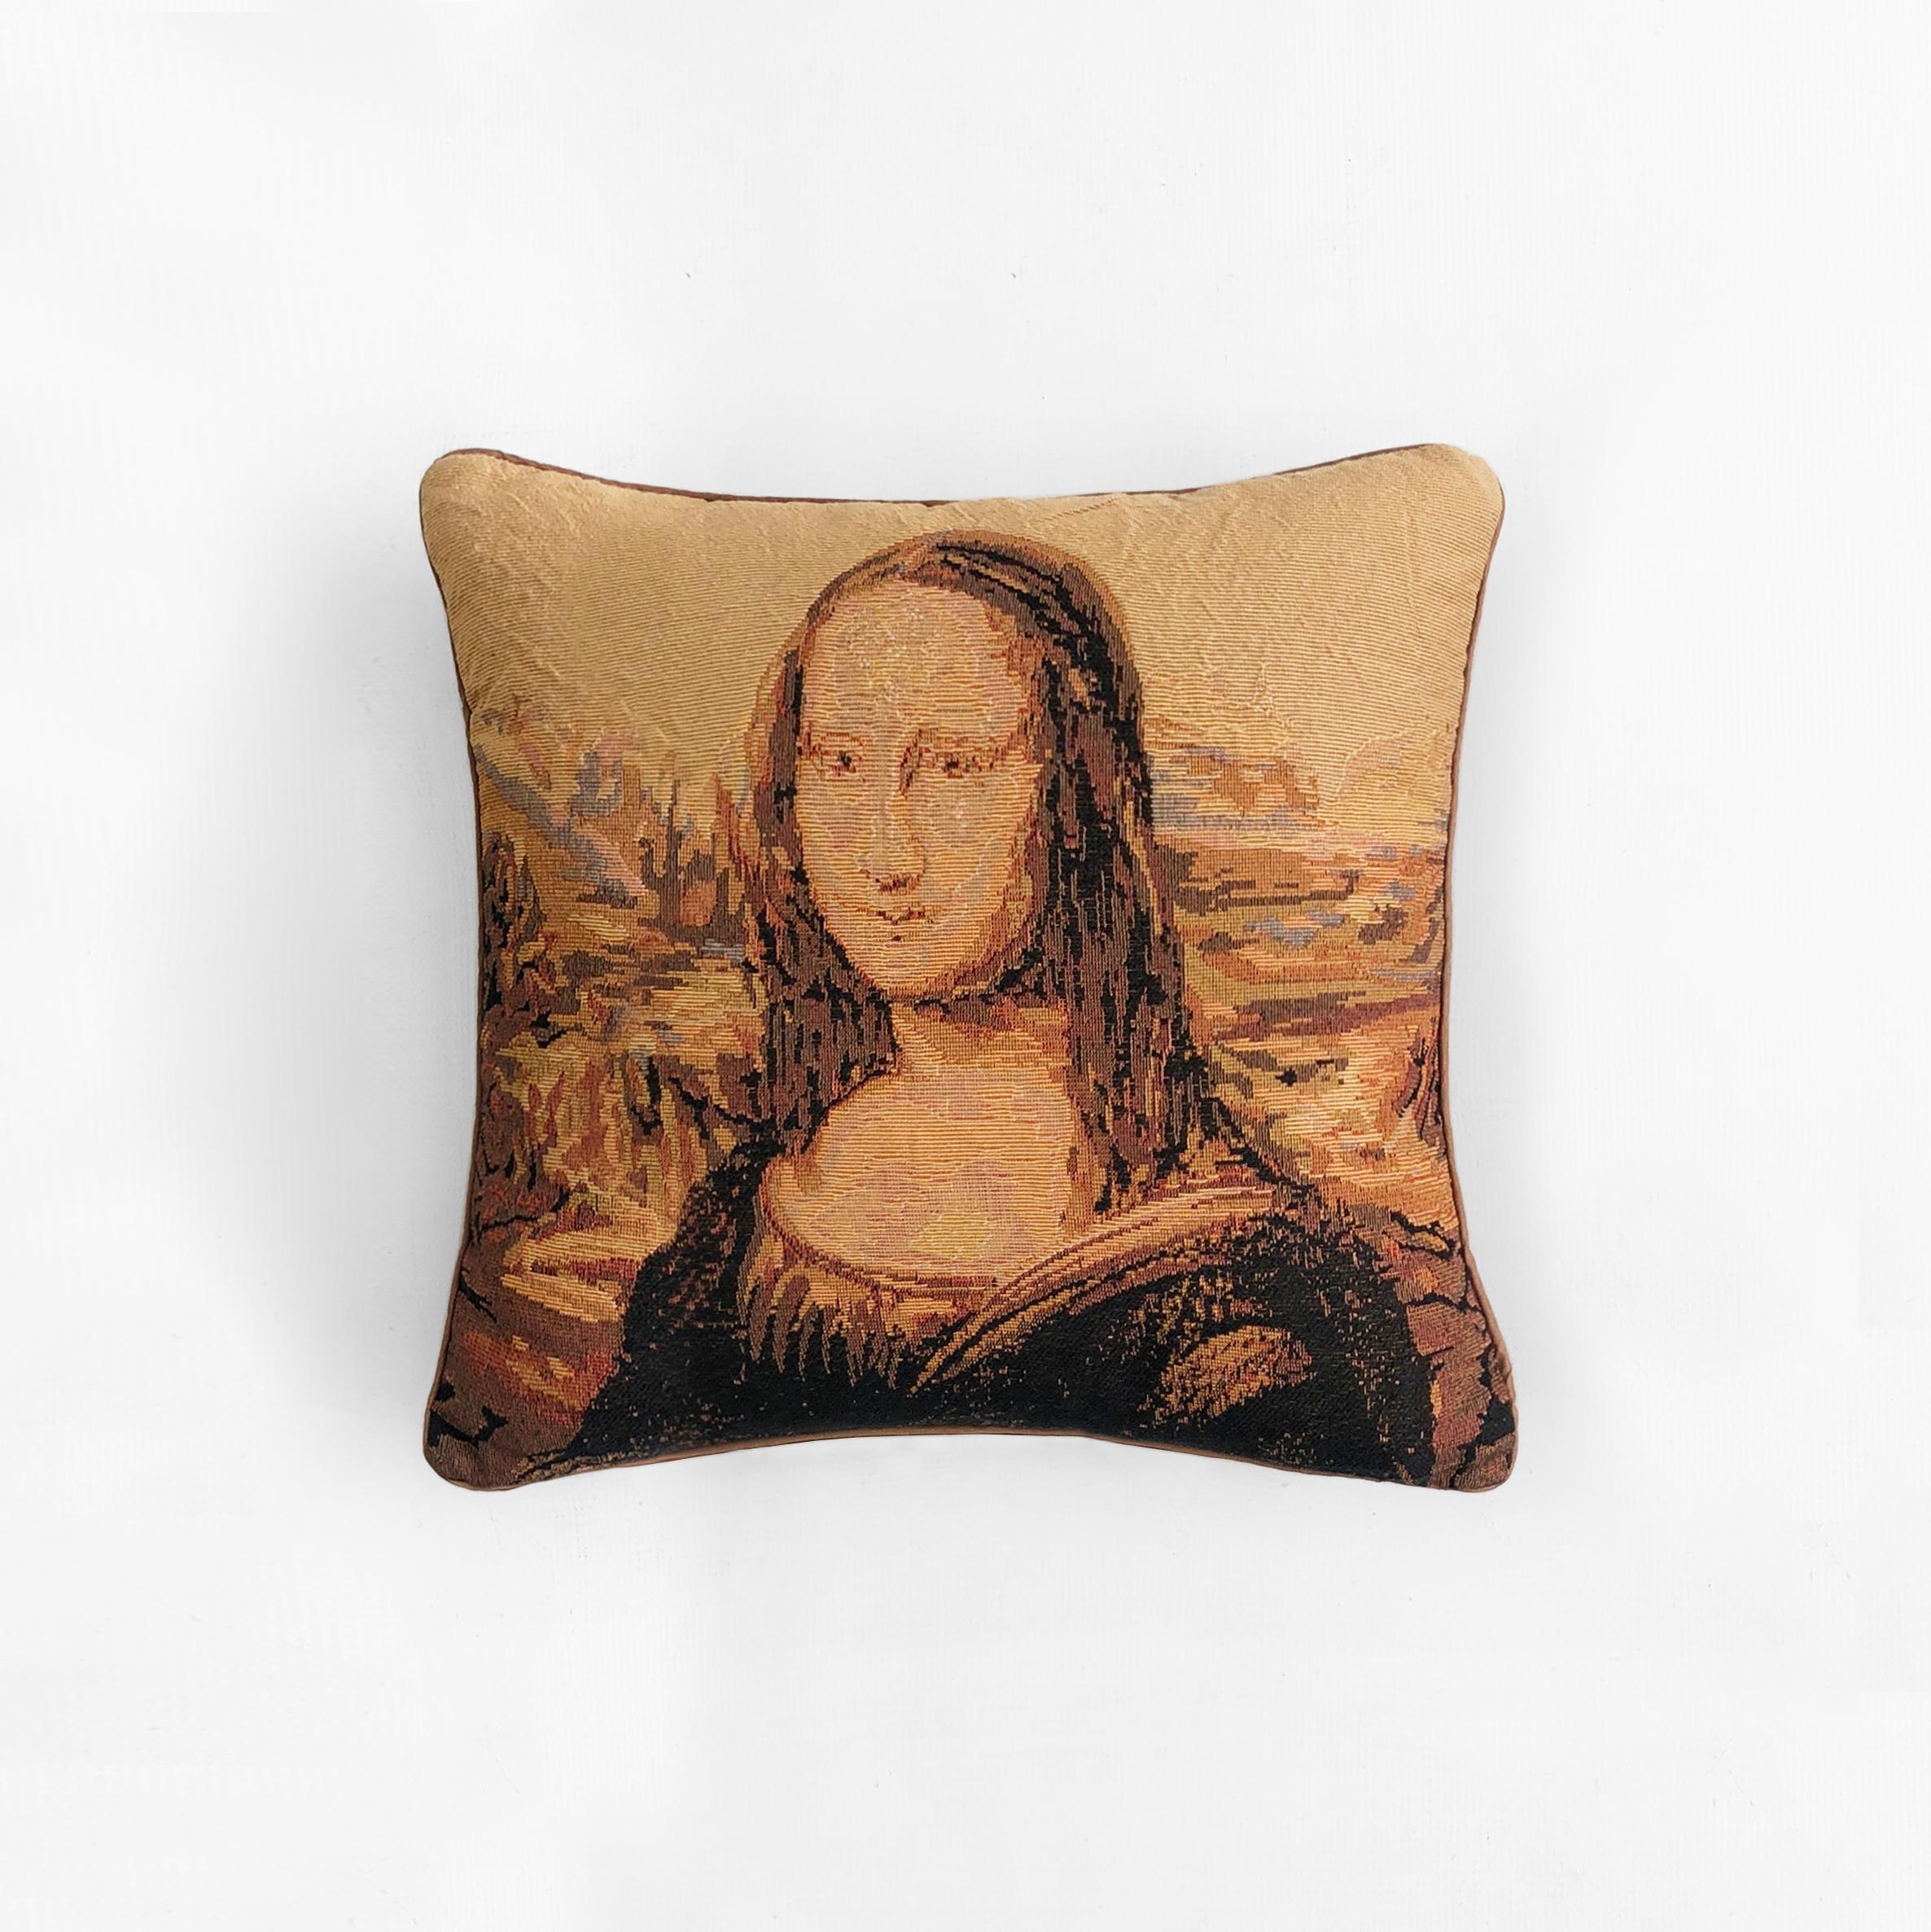 The Mona Lisa is possibly the most famous artwork in the world, and these comfortable cushions faithfully recreate Leonardo da Vinci’s masterpiece in warm yellows, browns, and oranges made of a weave imitating cross-stitch.

The vintage mixed poly